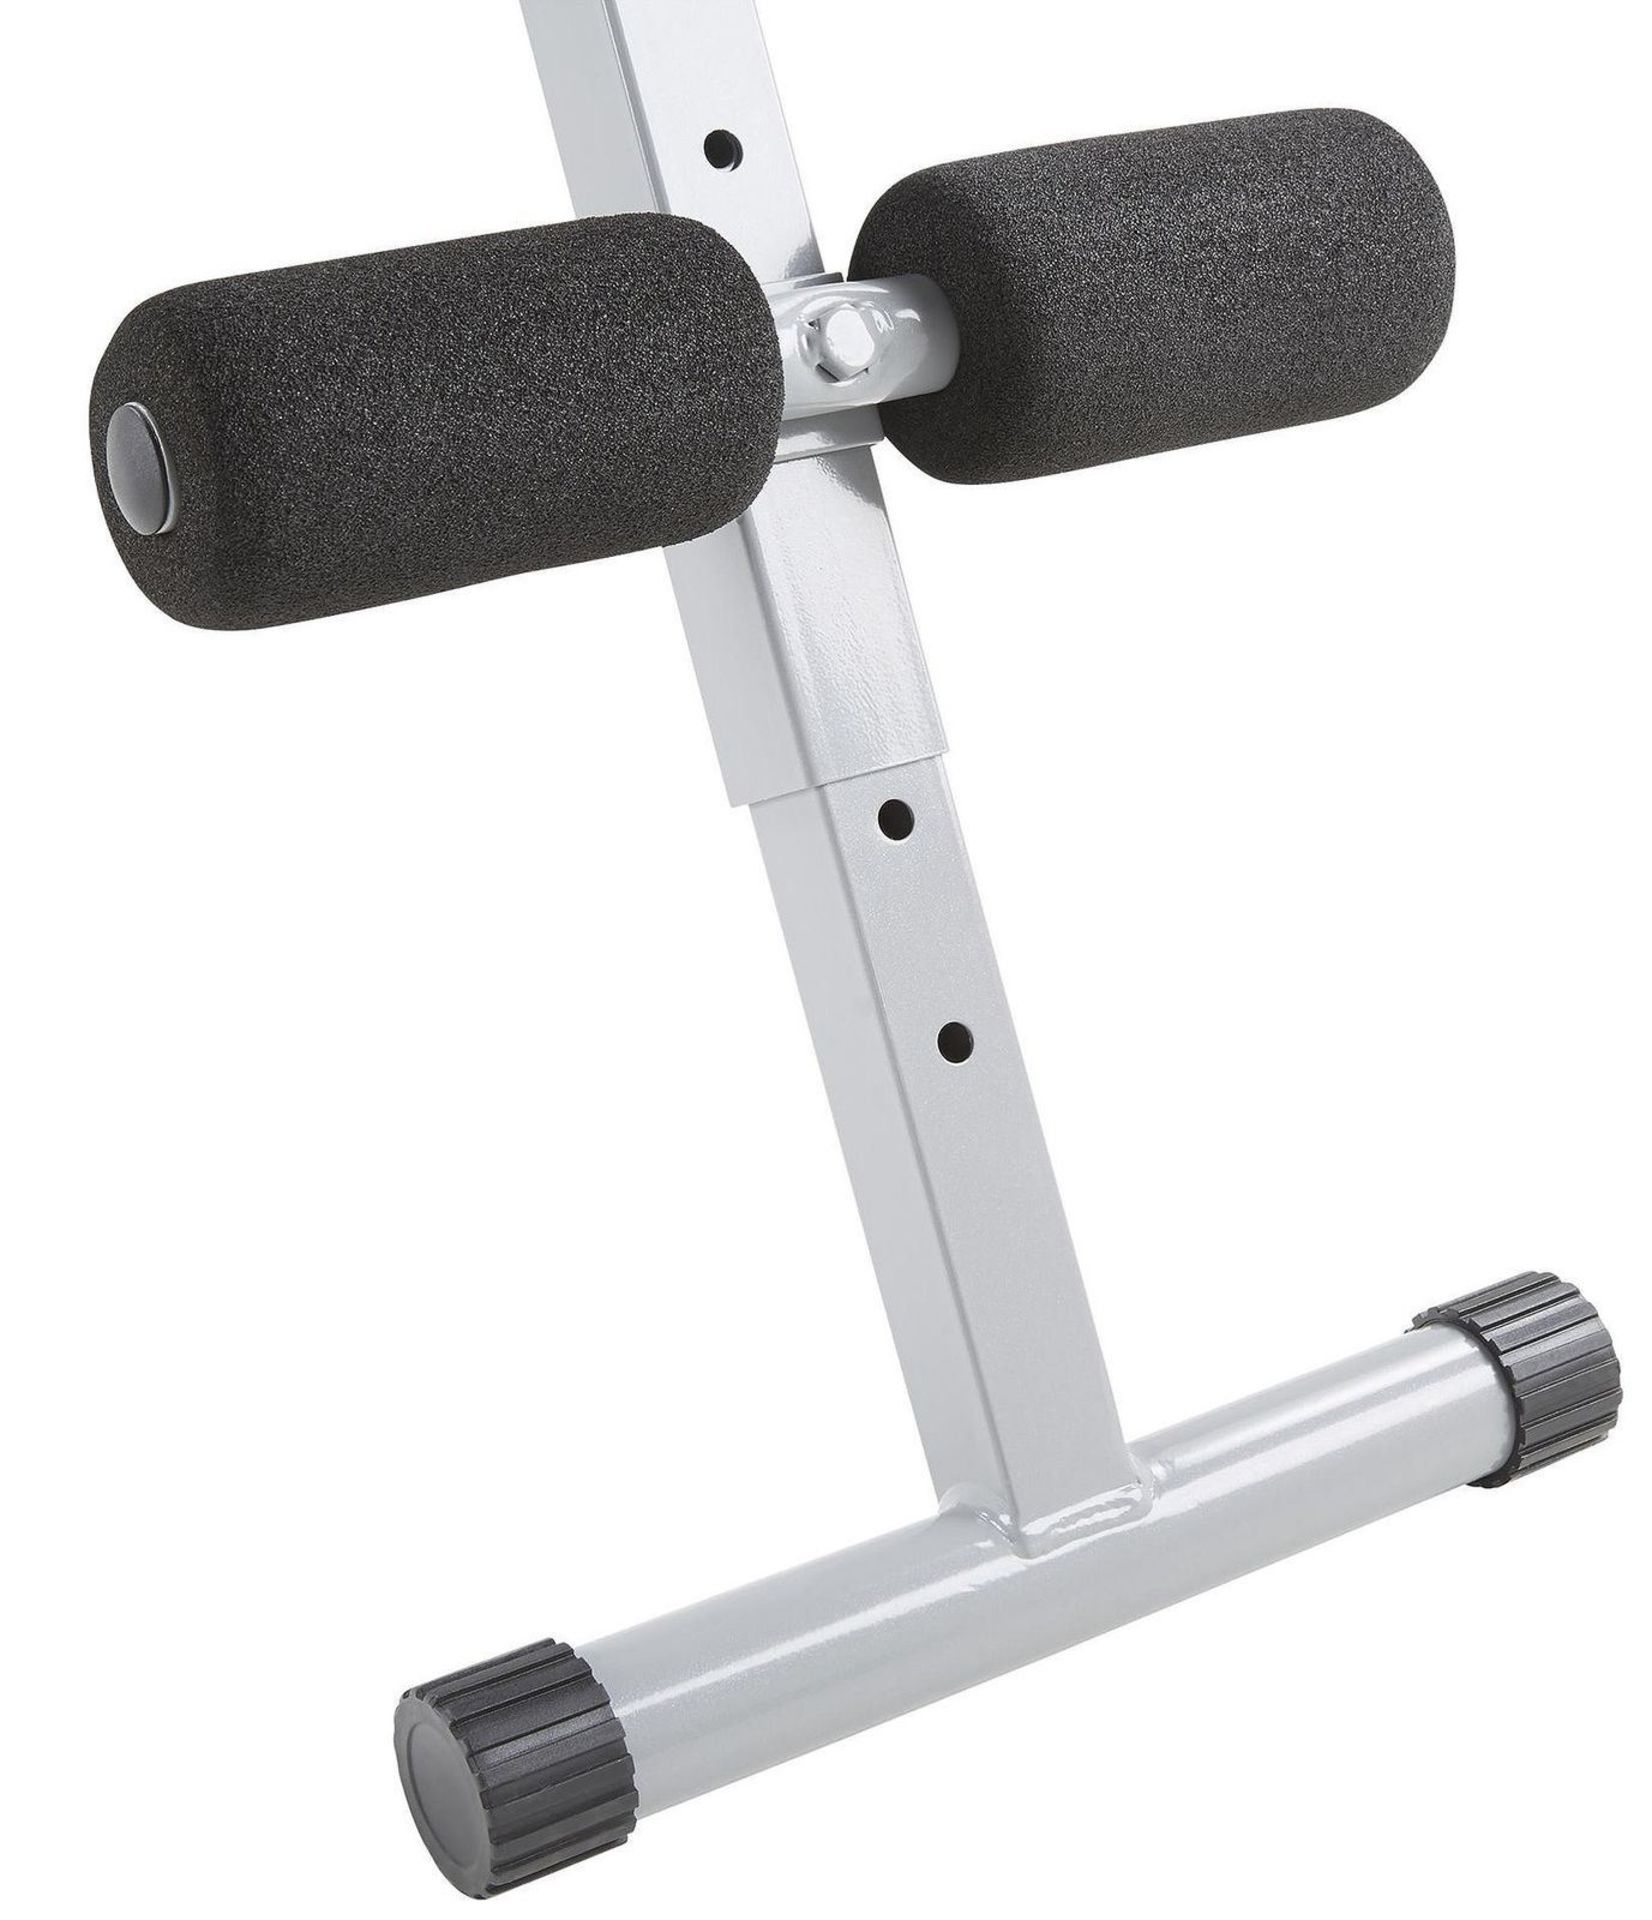 V Brand New 2 in 1 Incline/Sit Up Bench - Tesco Price £35.00 - Image 6 of 6